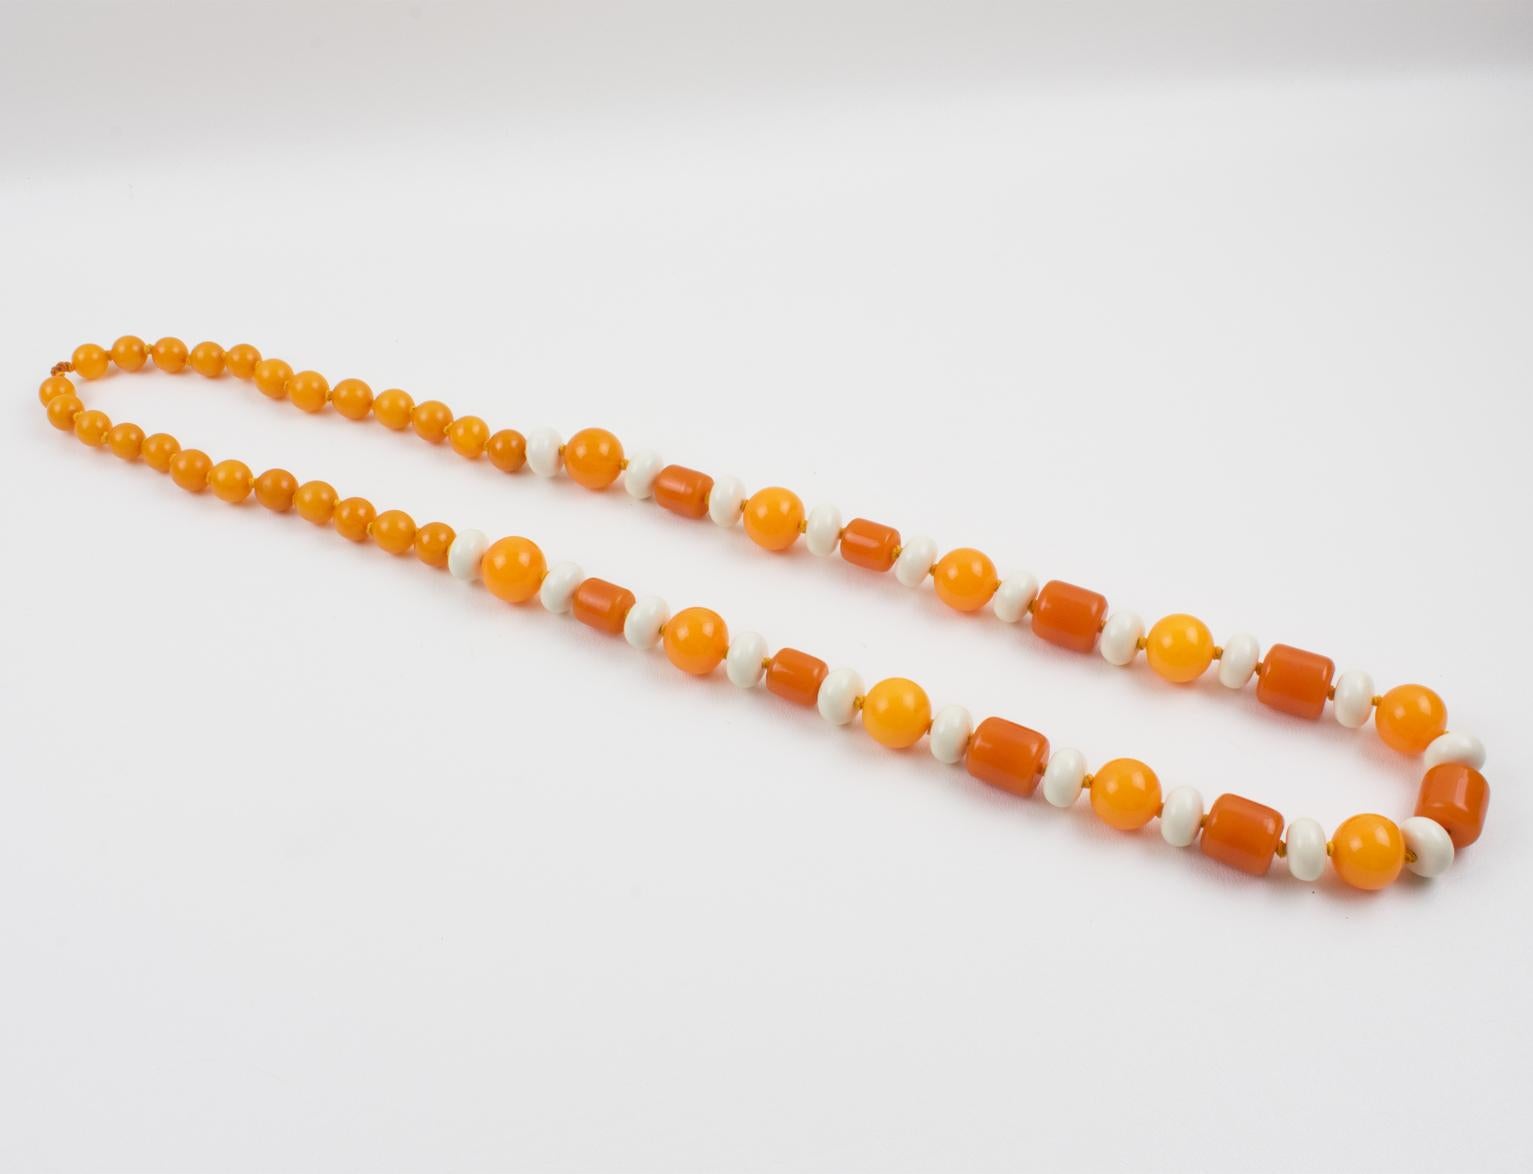 Bakelite and Lucite Long Necklace Orange and White Colors For Sale 2